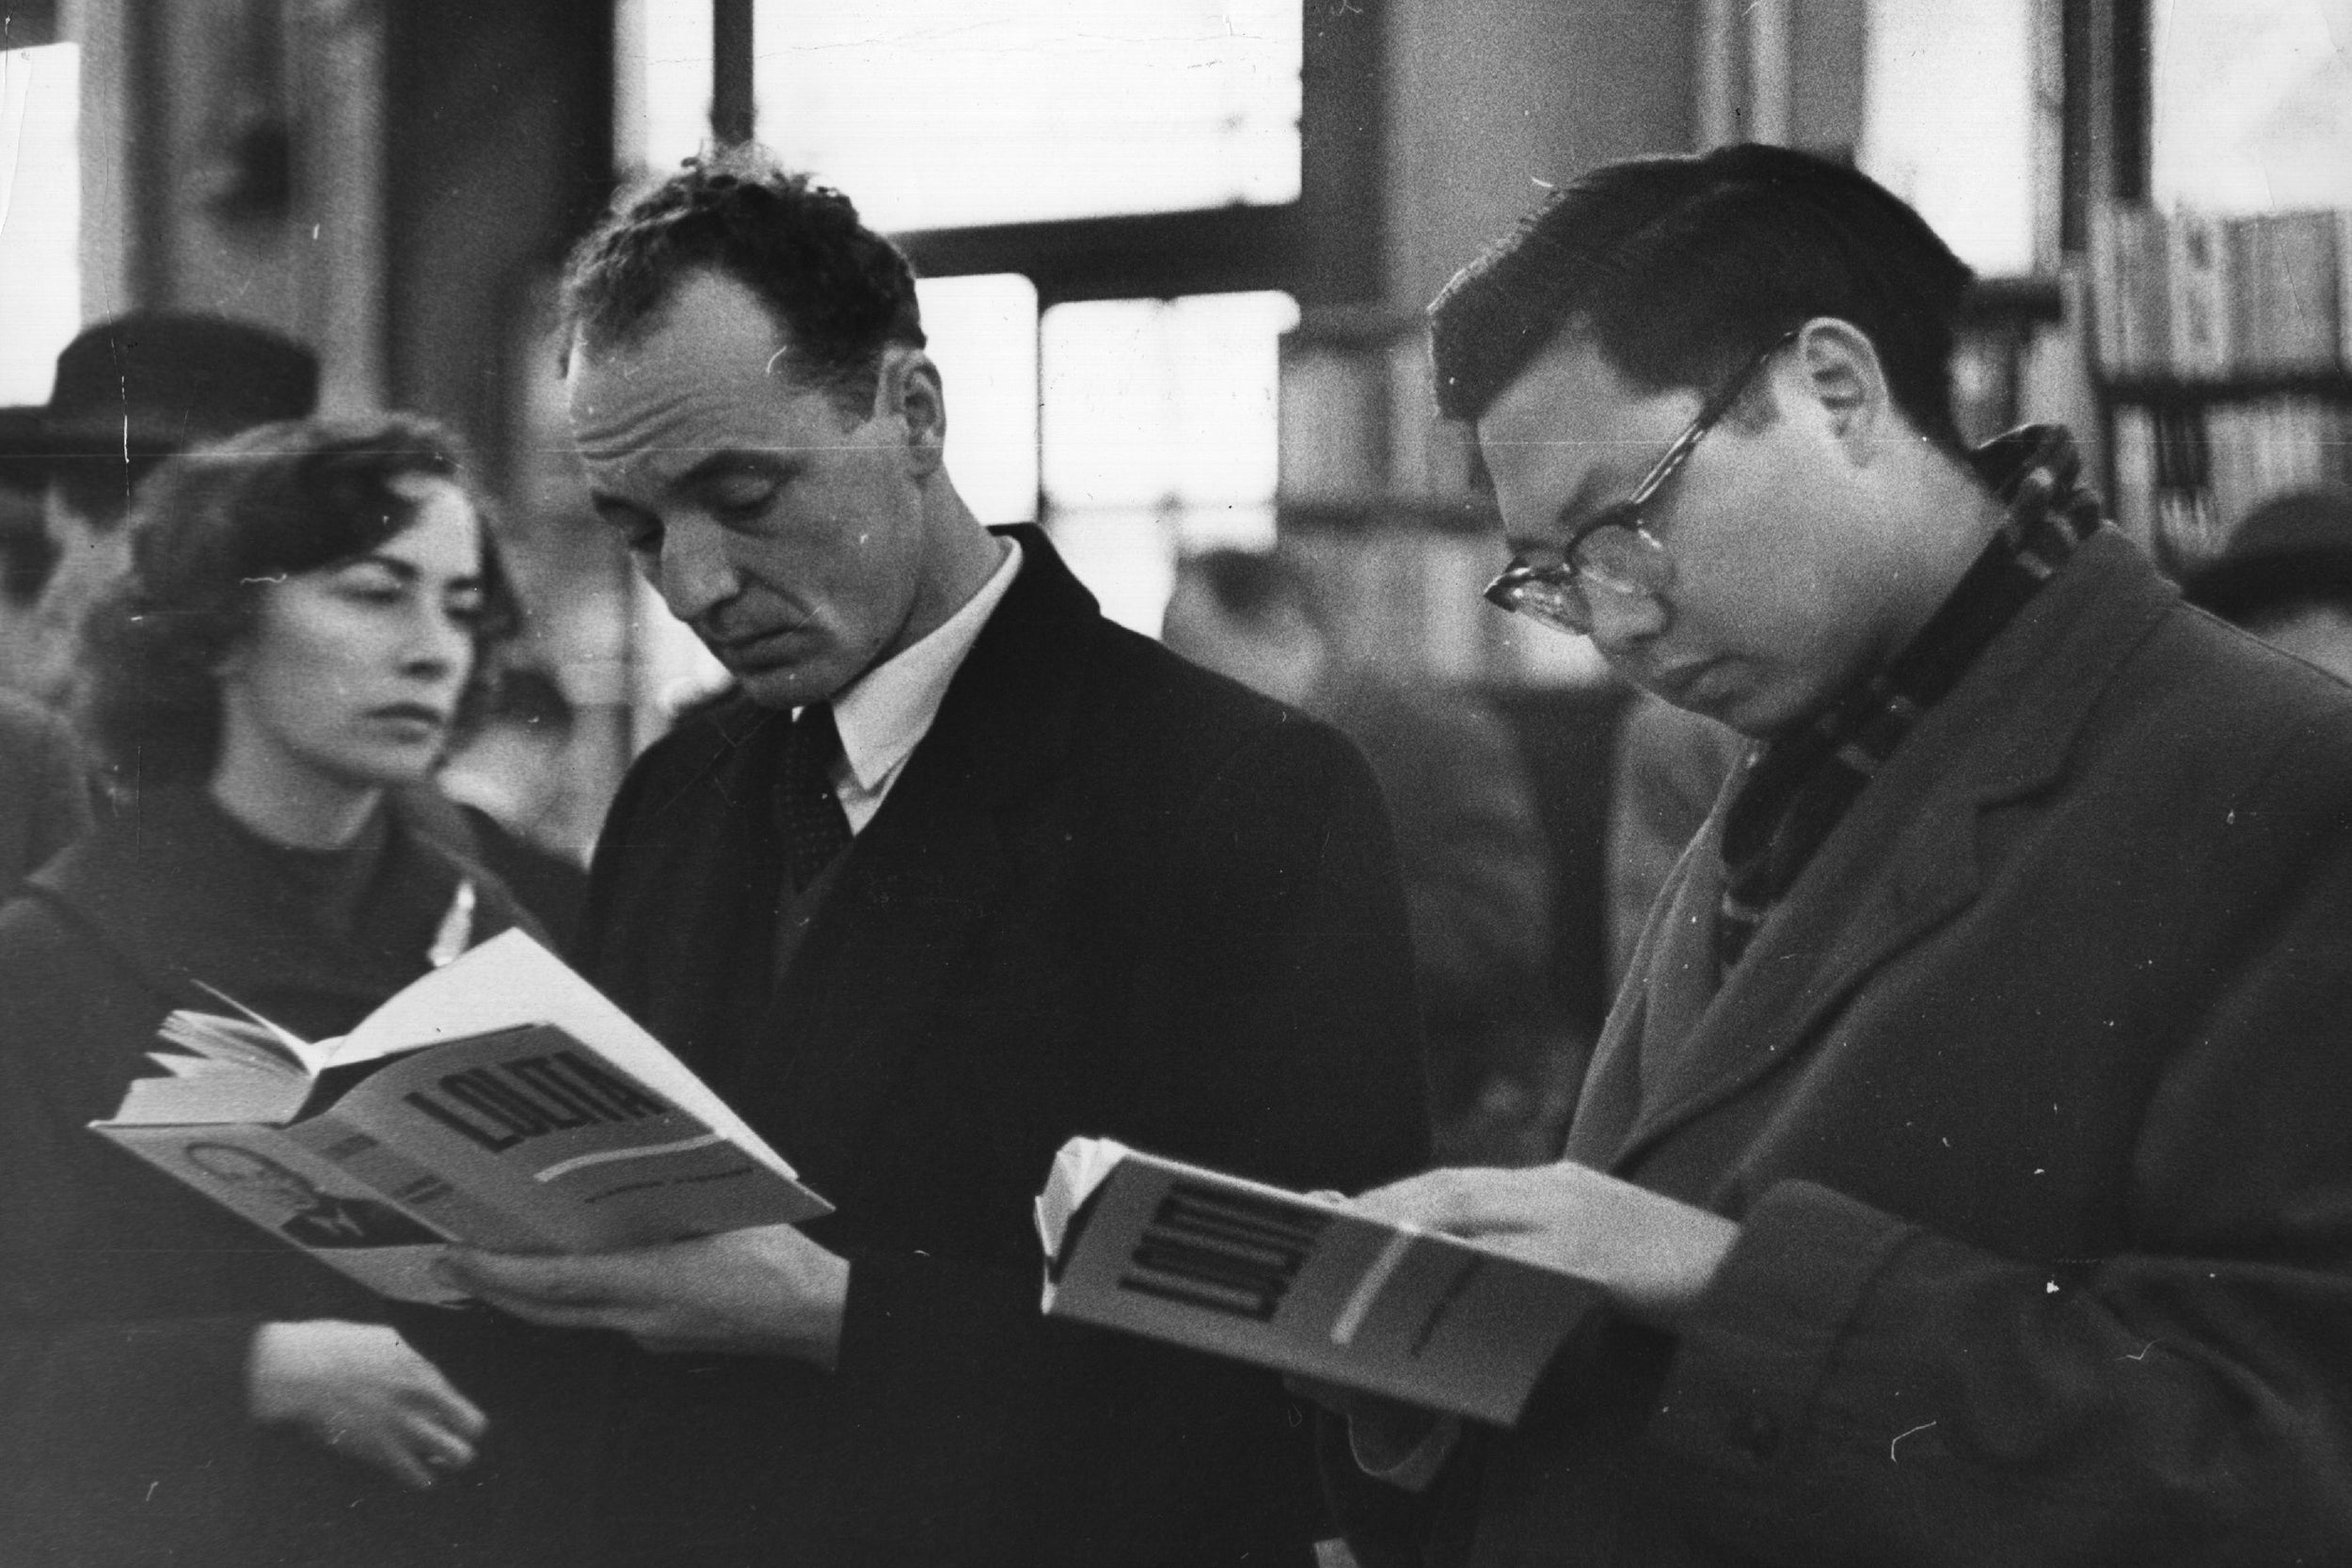 Customers at a London bookshop read ‘Lolita’ on its UK release in 1959